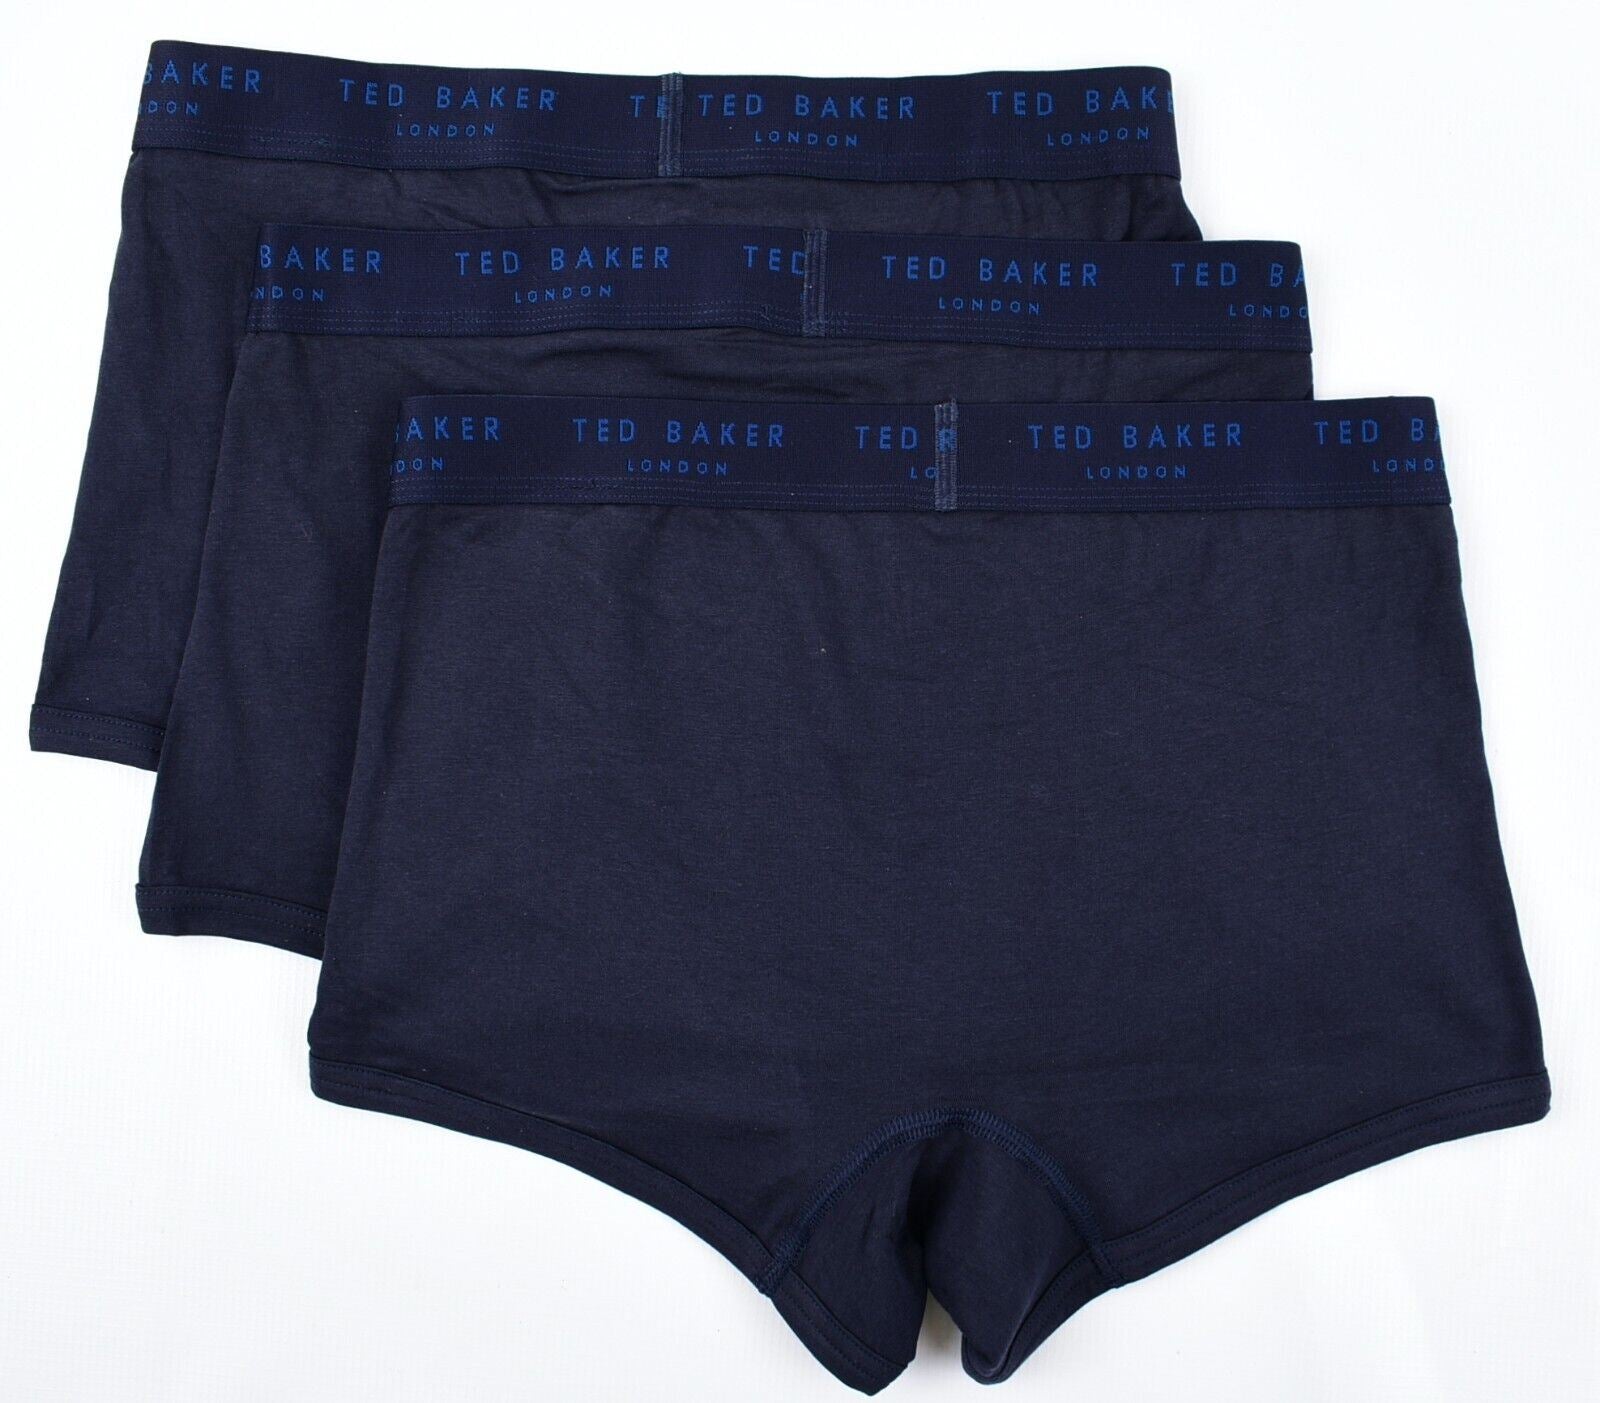 TED BAKER Underwear: Men's 3-Pack Fitted Boxer Trunks, Navy Blue, size S